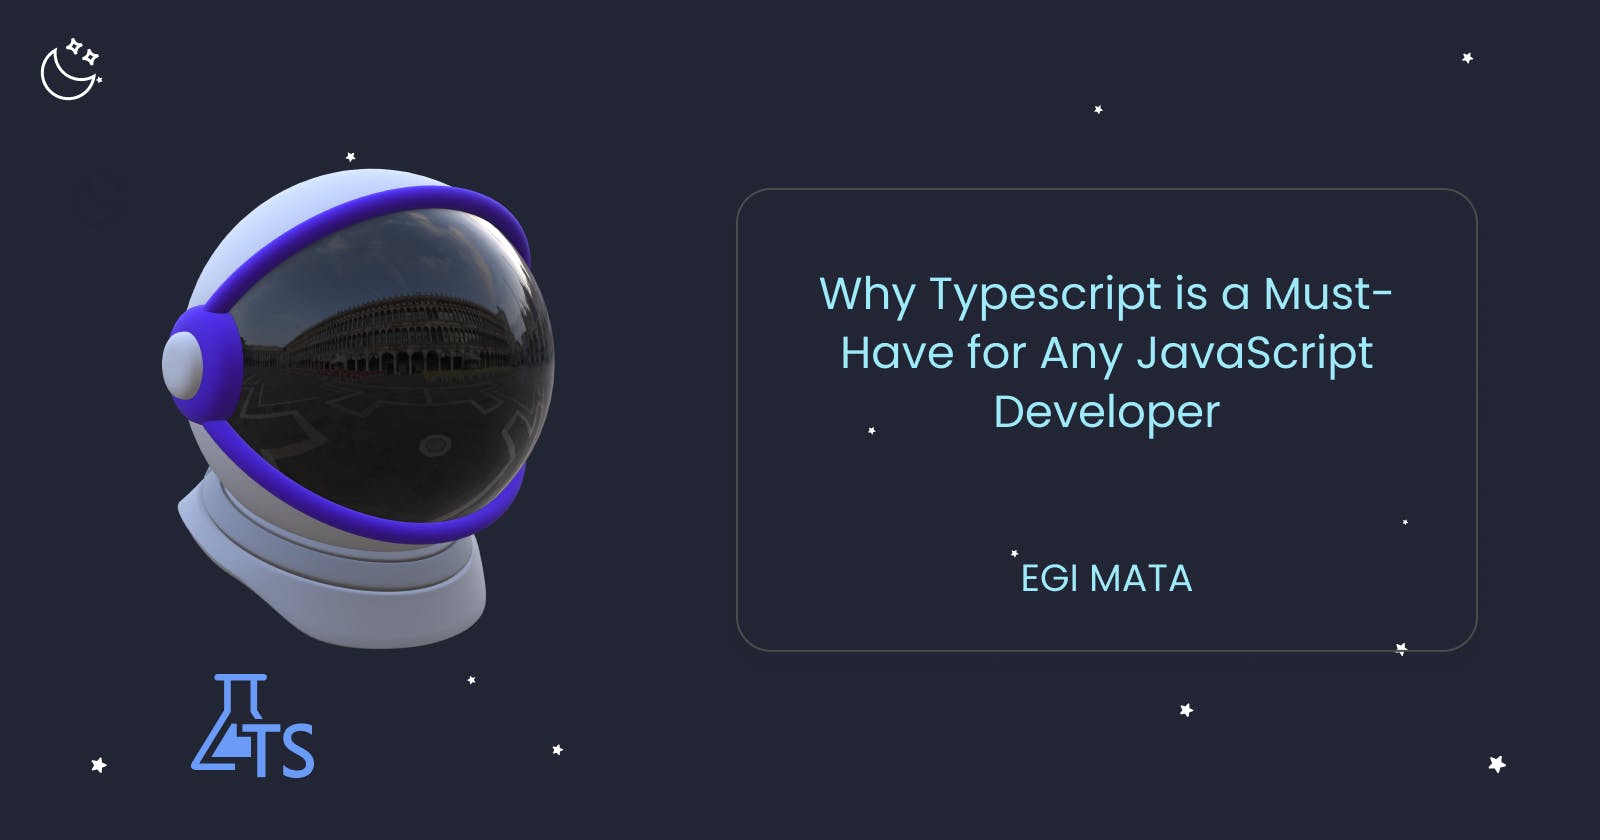 Why Typescript is a Must-Have for Any JavaScript Developer